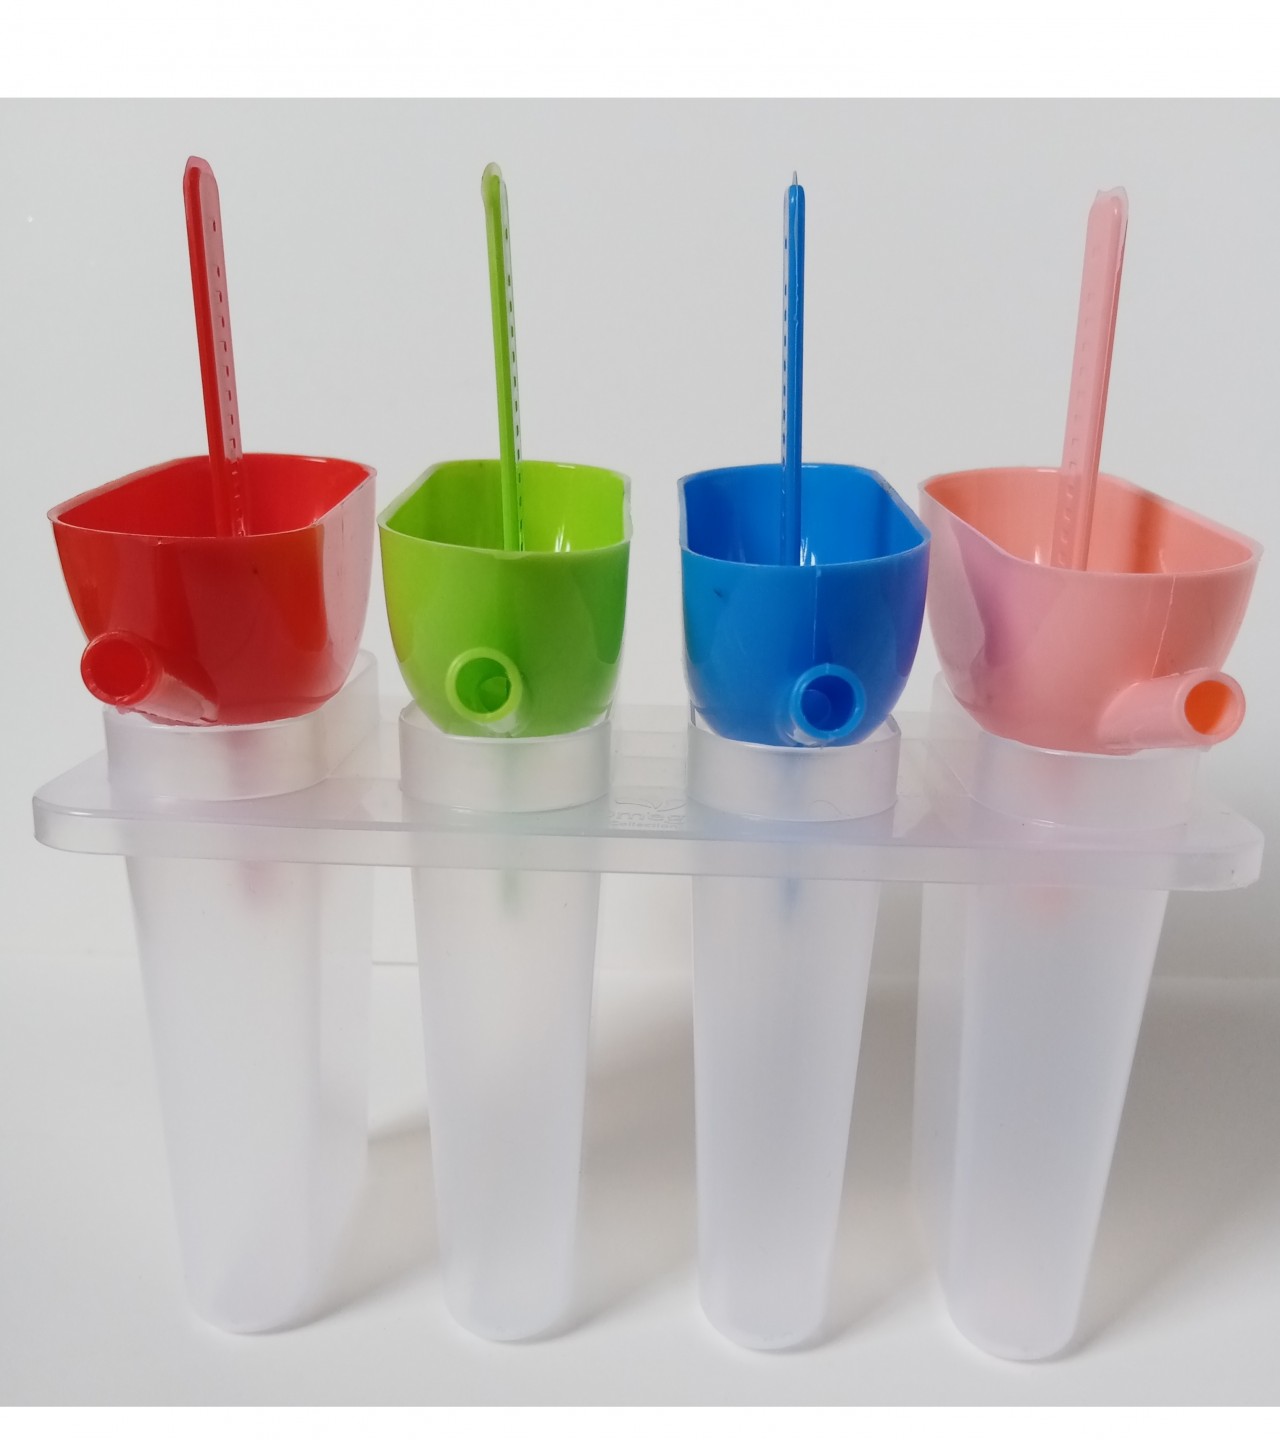 Wahaaj fitness 1pcs Ice Pop Maker Molds With Sipper Straw Base for Homemade Frozen Treats Popsicles